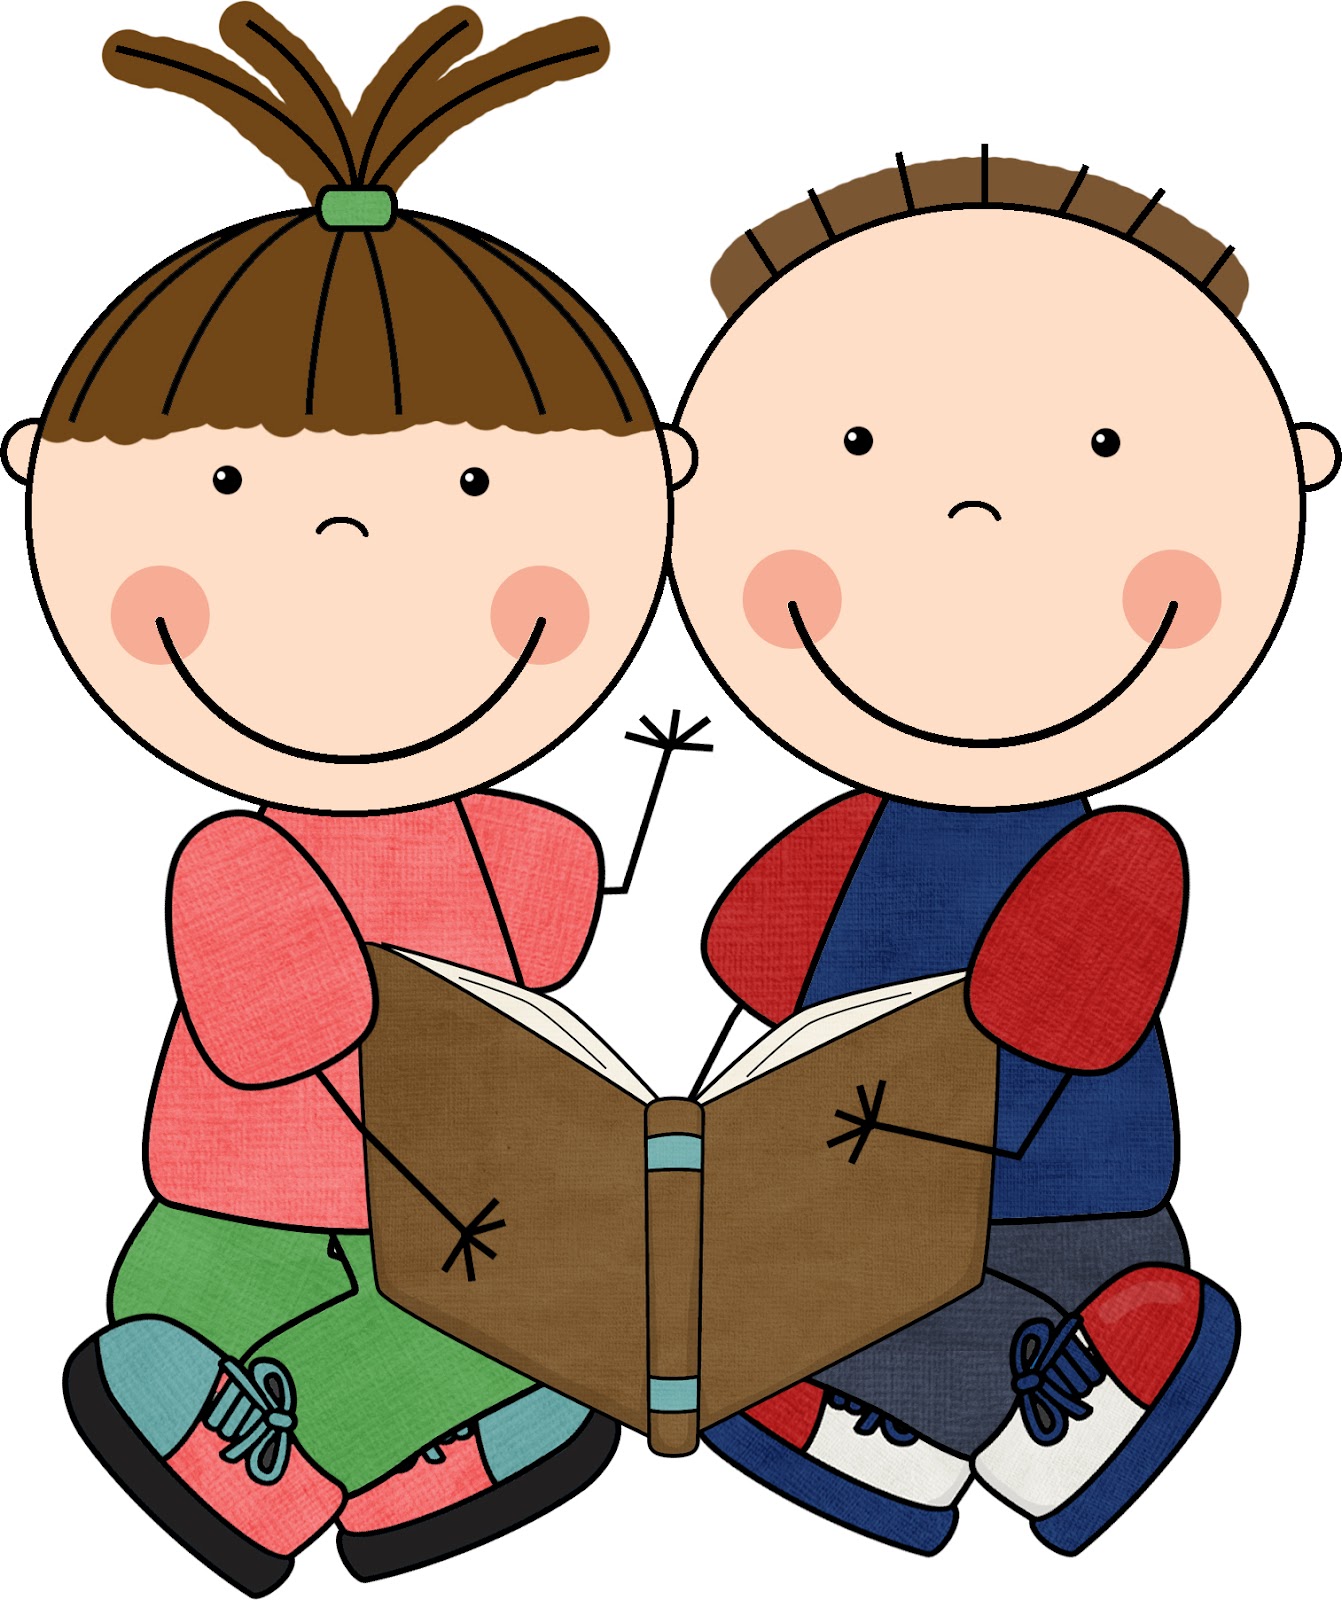 Free Clip Art Images For Kids - Clipart library